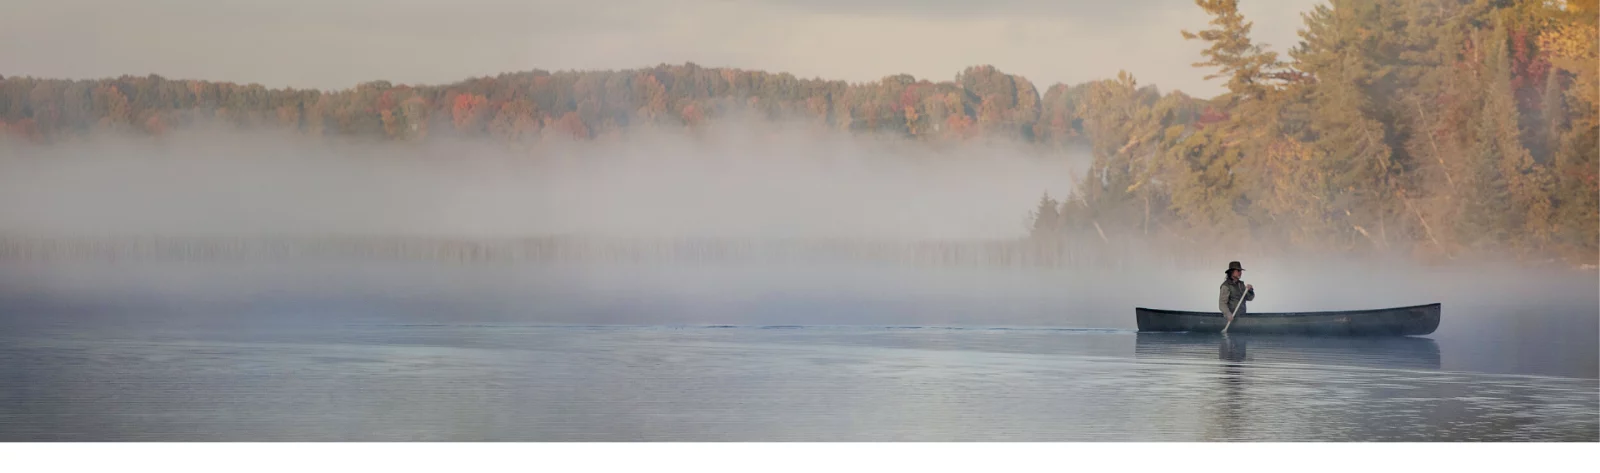 Drew Hodgins paddles a canoe on a calm lake. Fog over the water blurs the line between lake and sky.